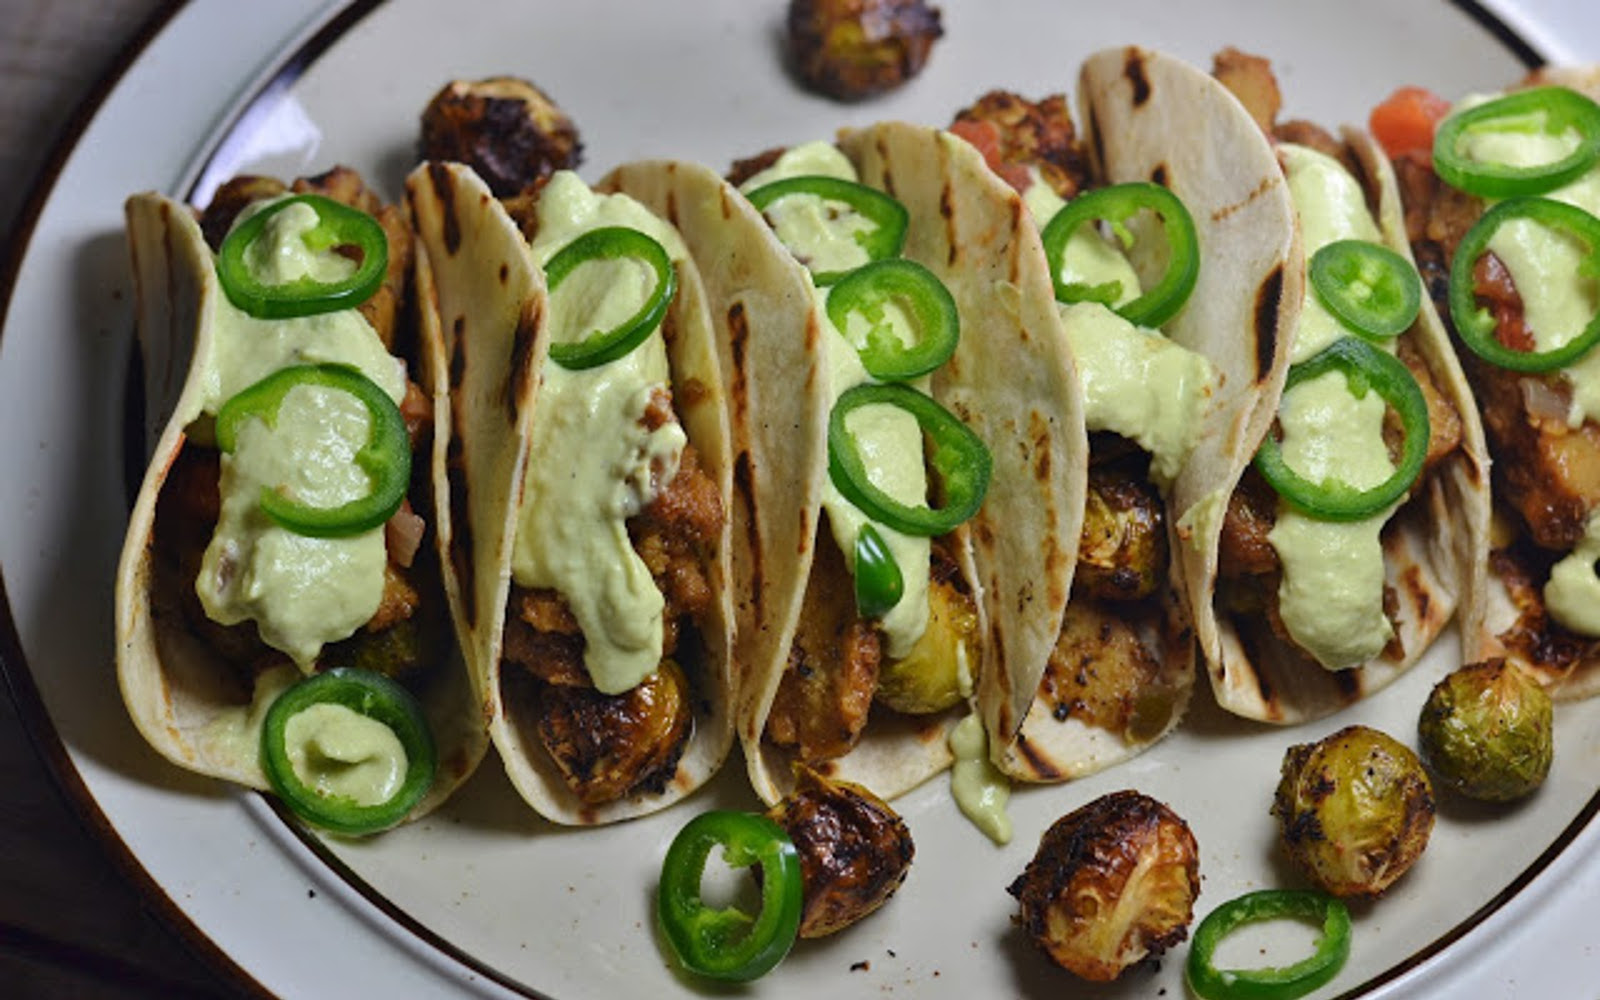 Vegan Churrasco-Style Seitan Tacos With Roasted Brussels Sprouts